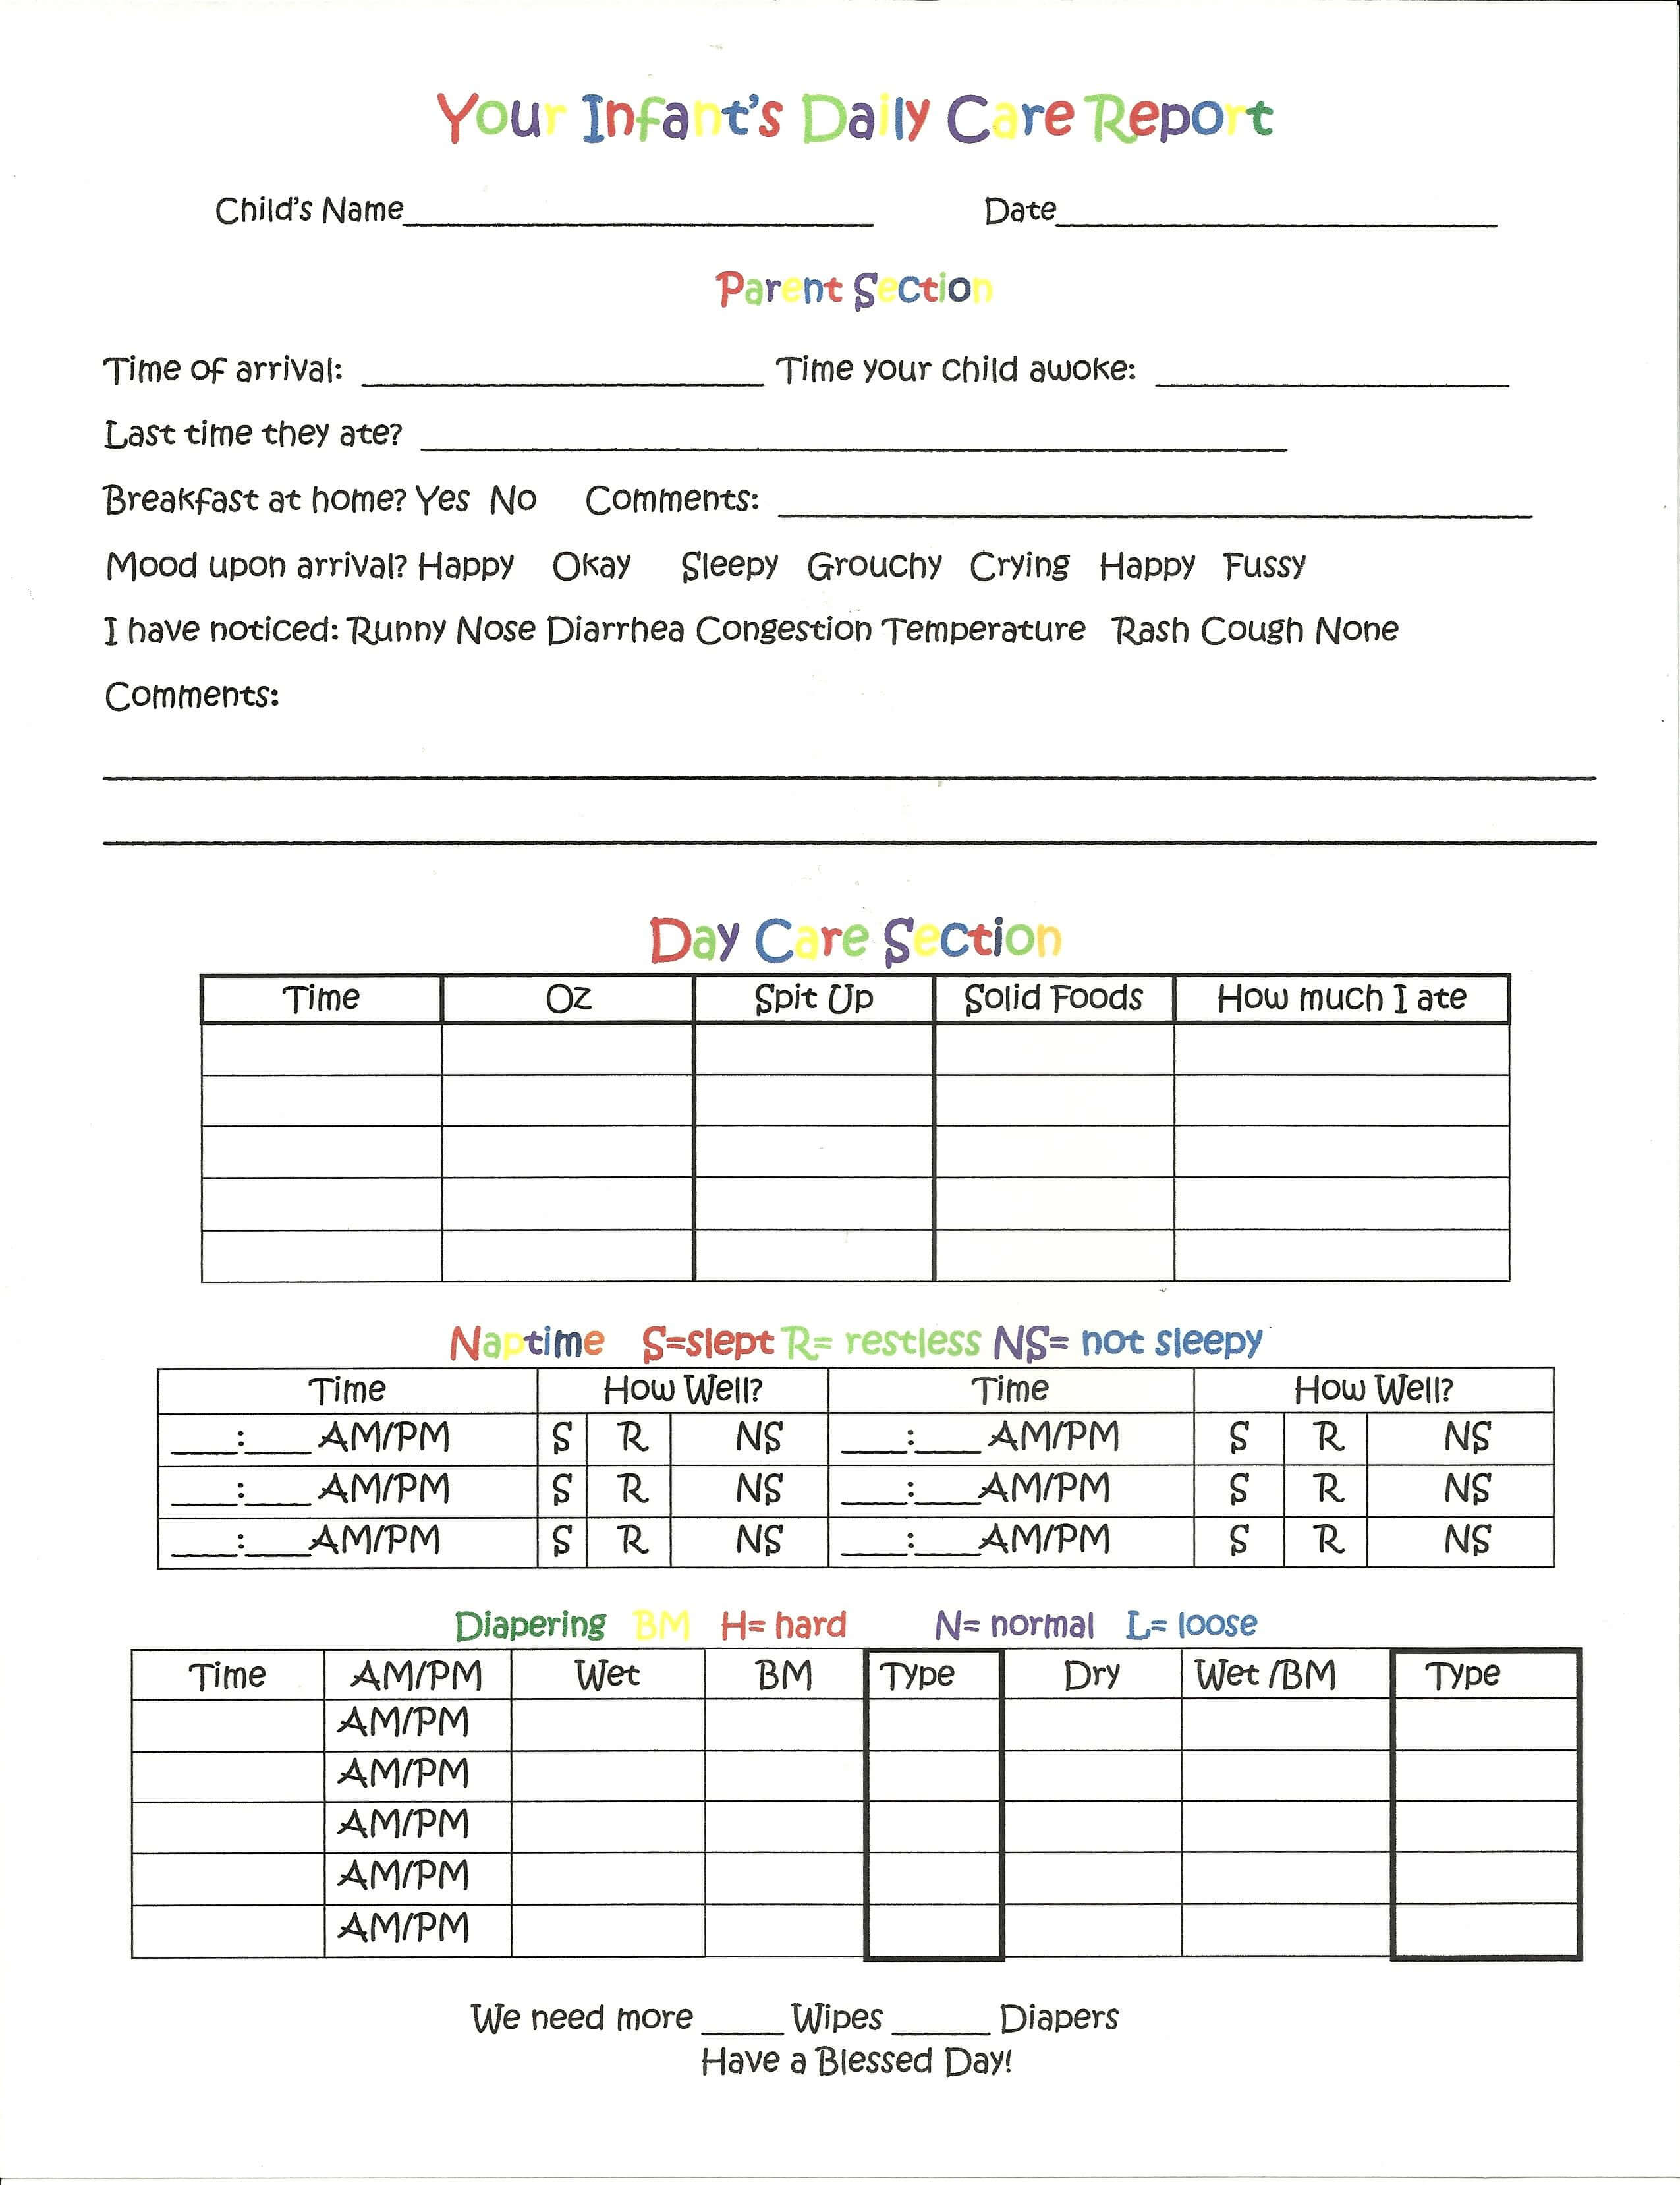 Daily Report For Infants. That I Put Together. | Preschool With Daycare Infant Daily Report Template